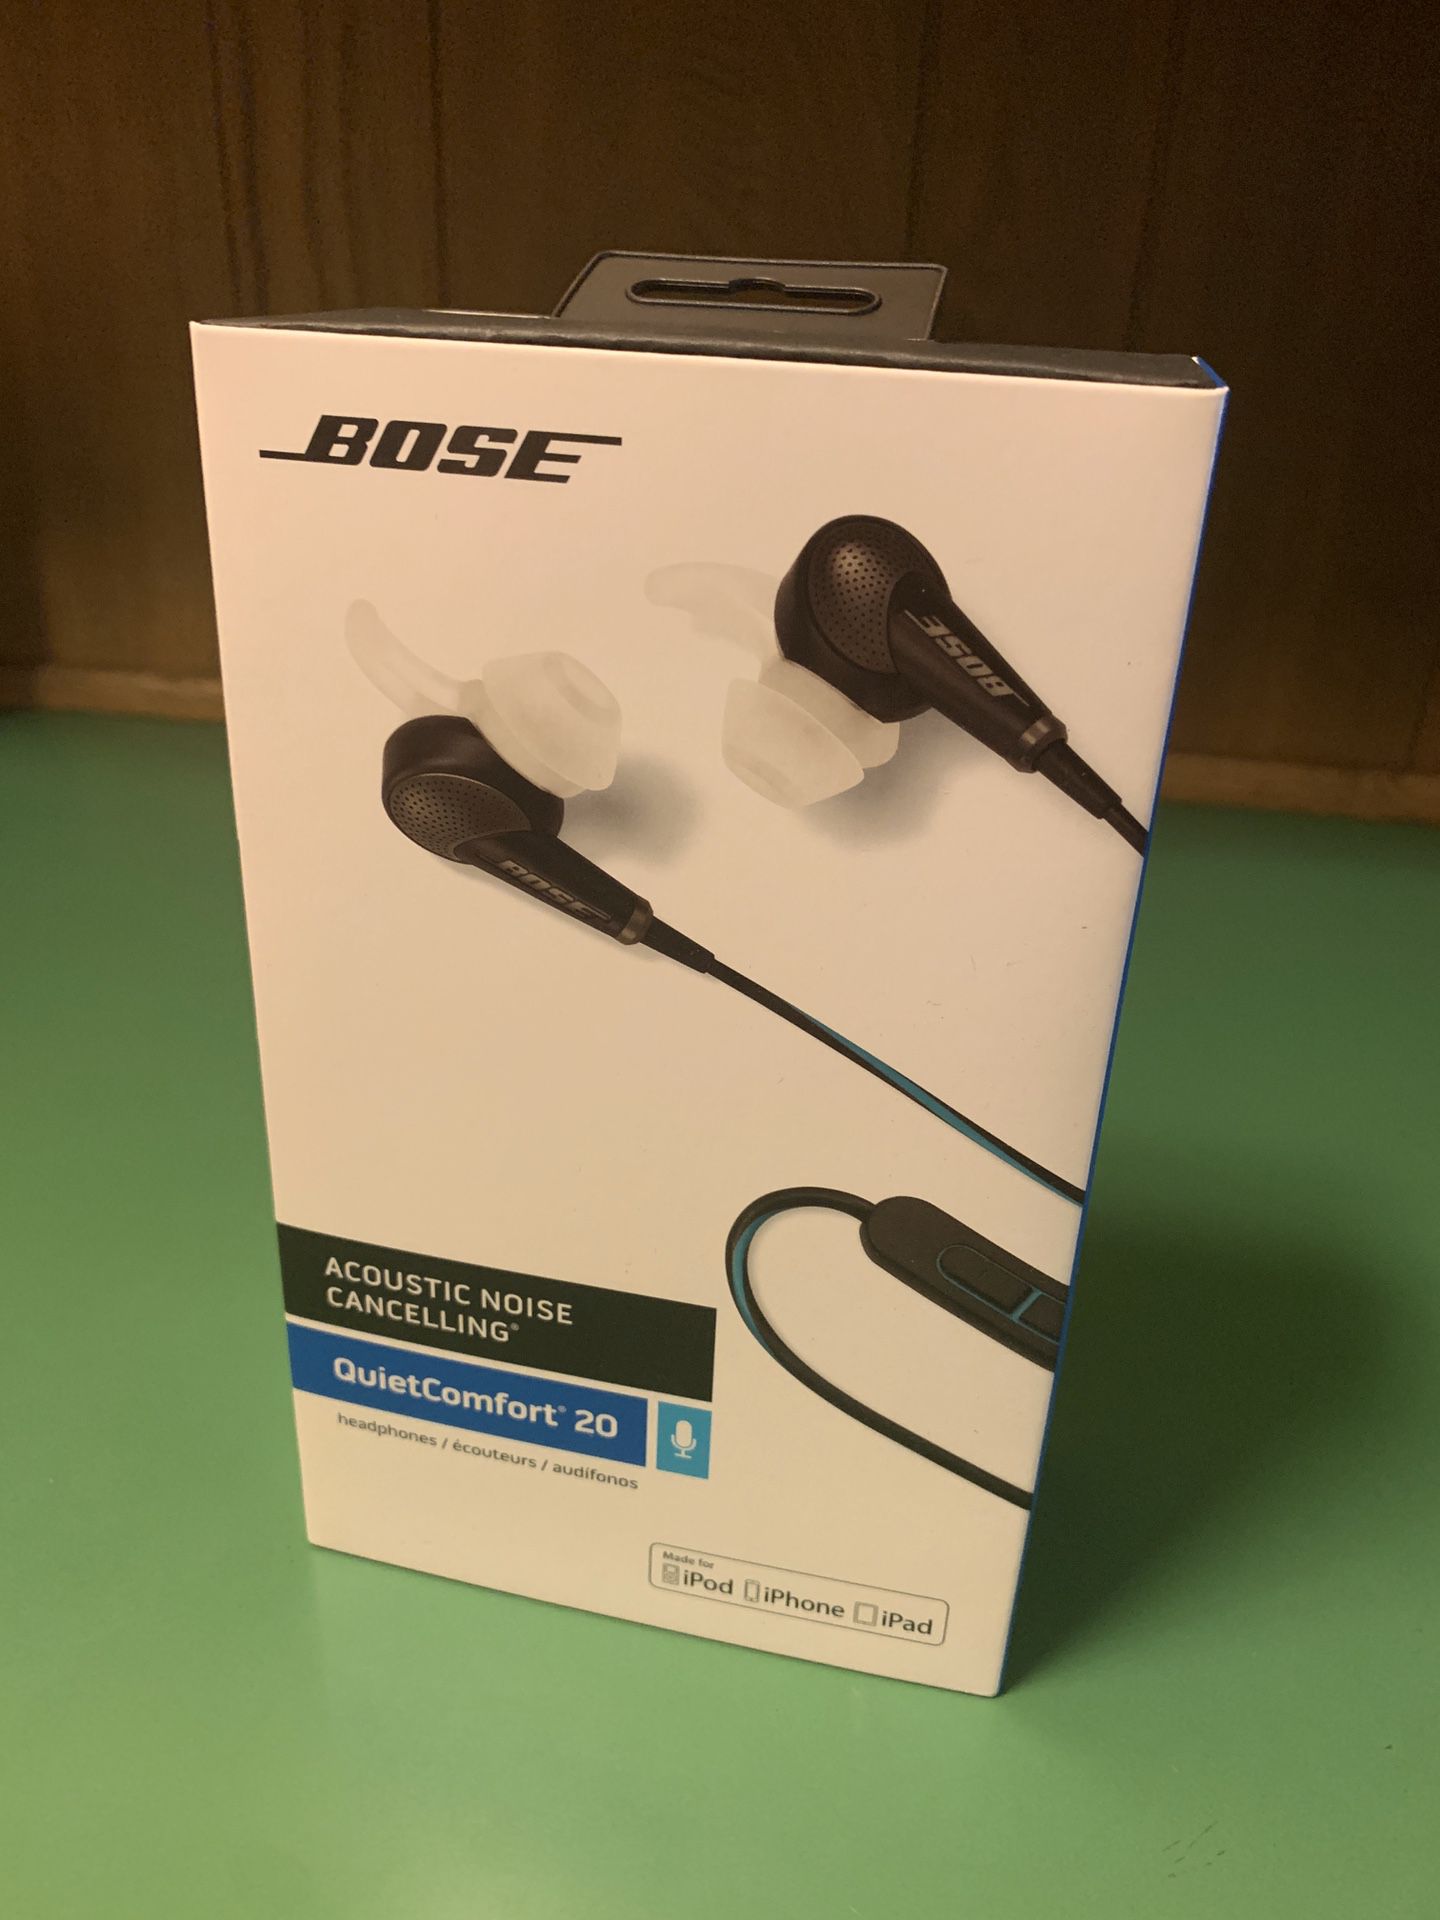 Bose noise cancelling QuietComfort 20 earbuds